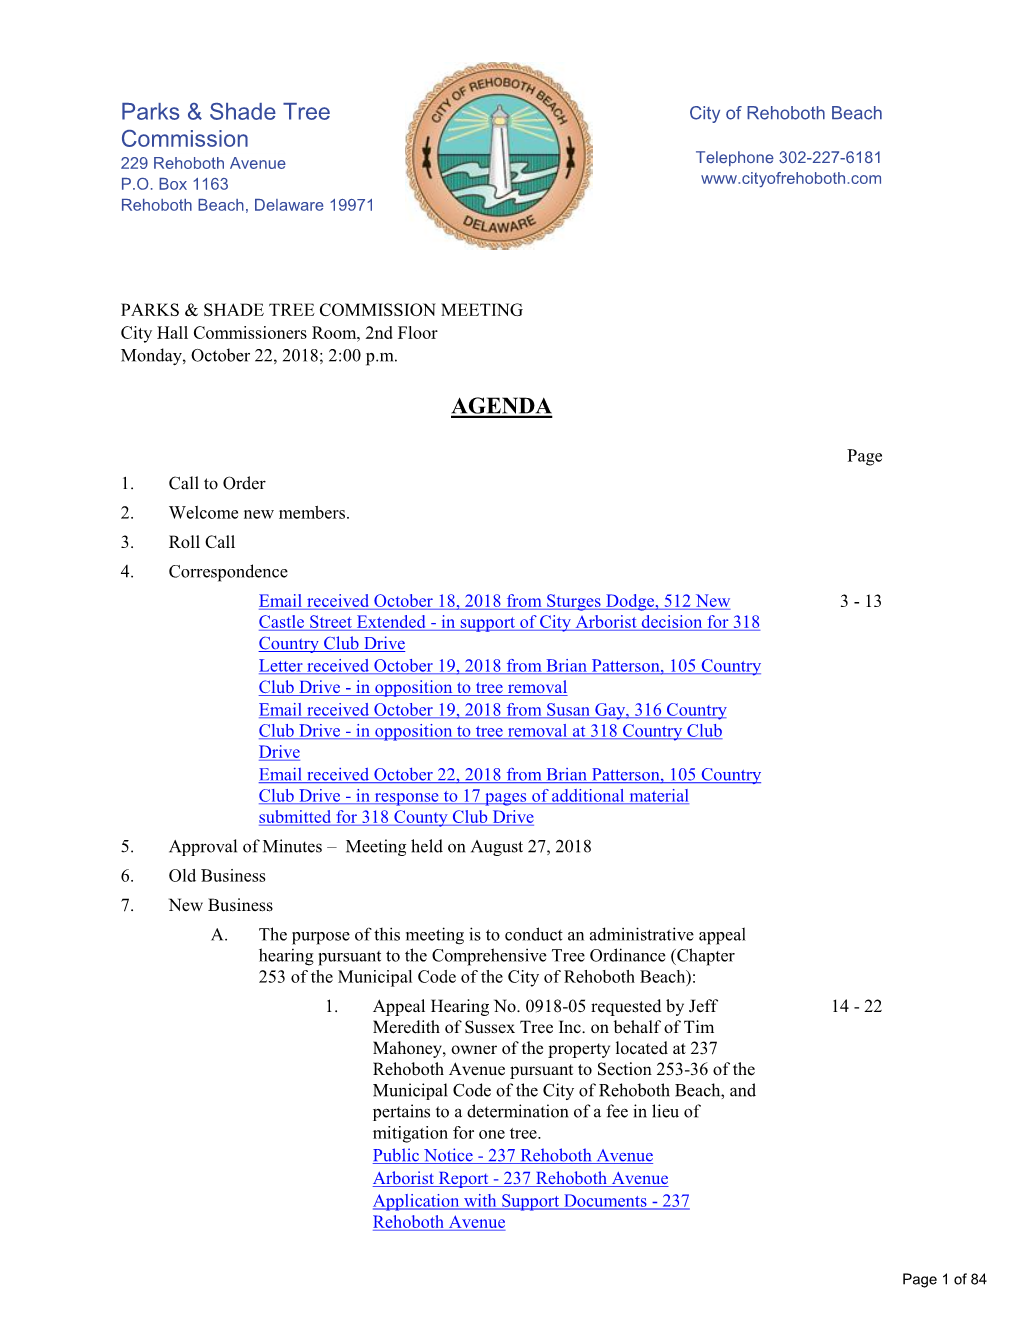 Parks & Shade Tree Commission Meeting